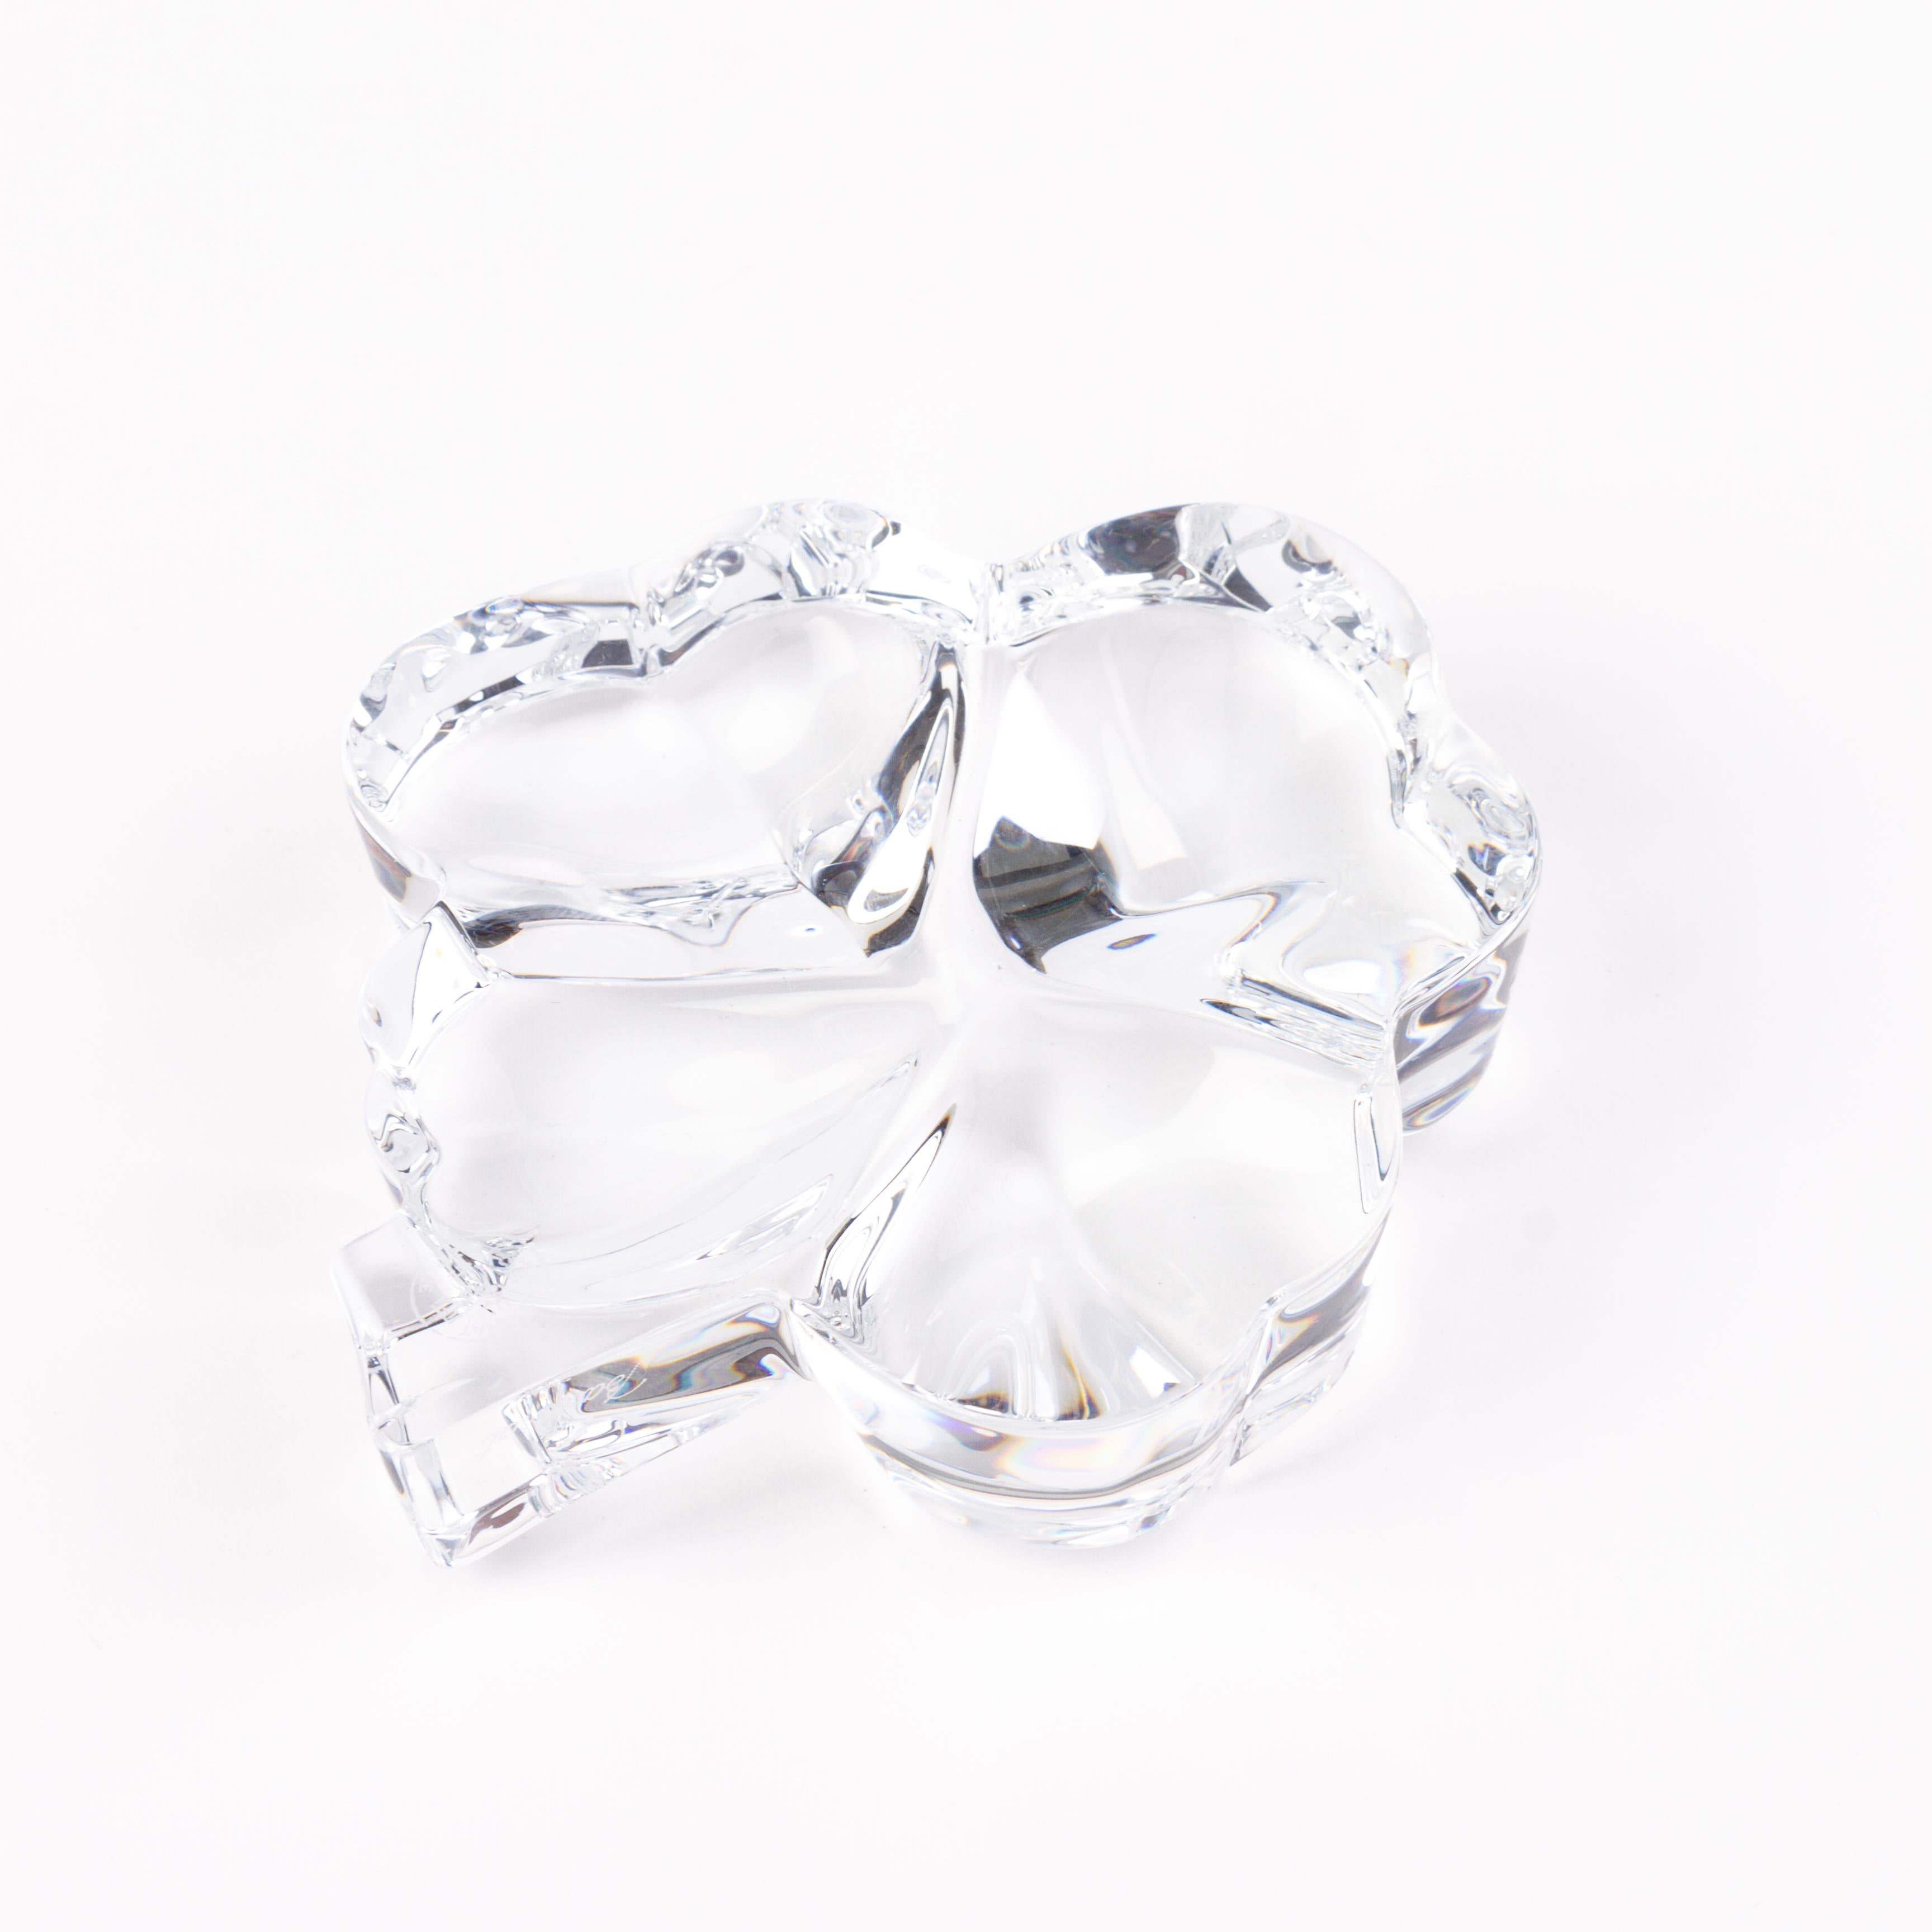 Baccarat Glass Crystal Four Leaf Clover Desk Paperweight  For Sale 1